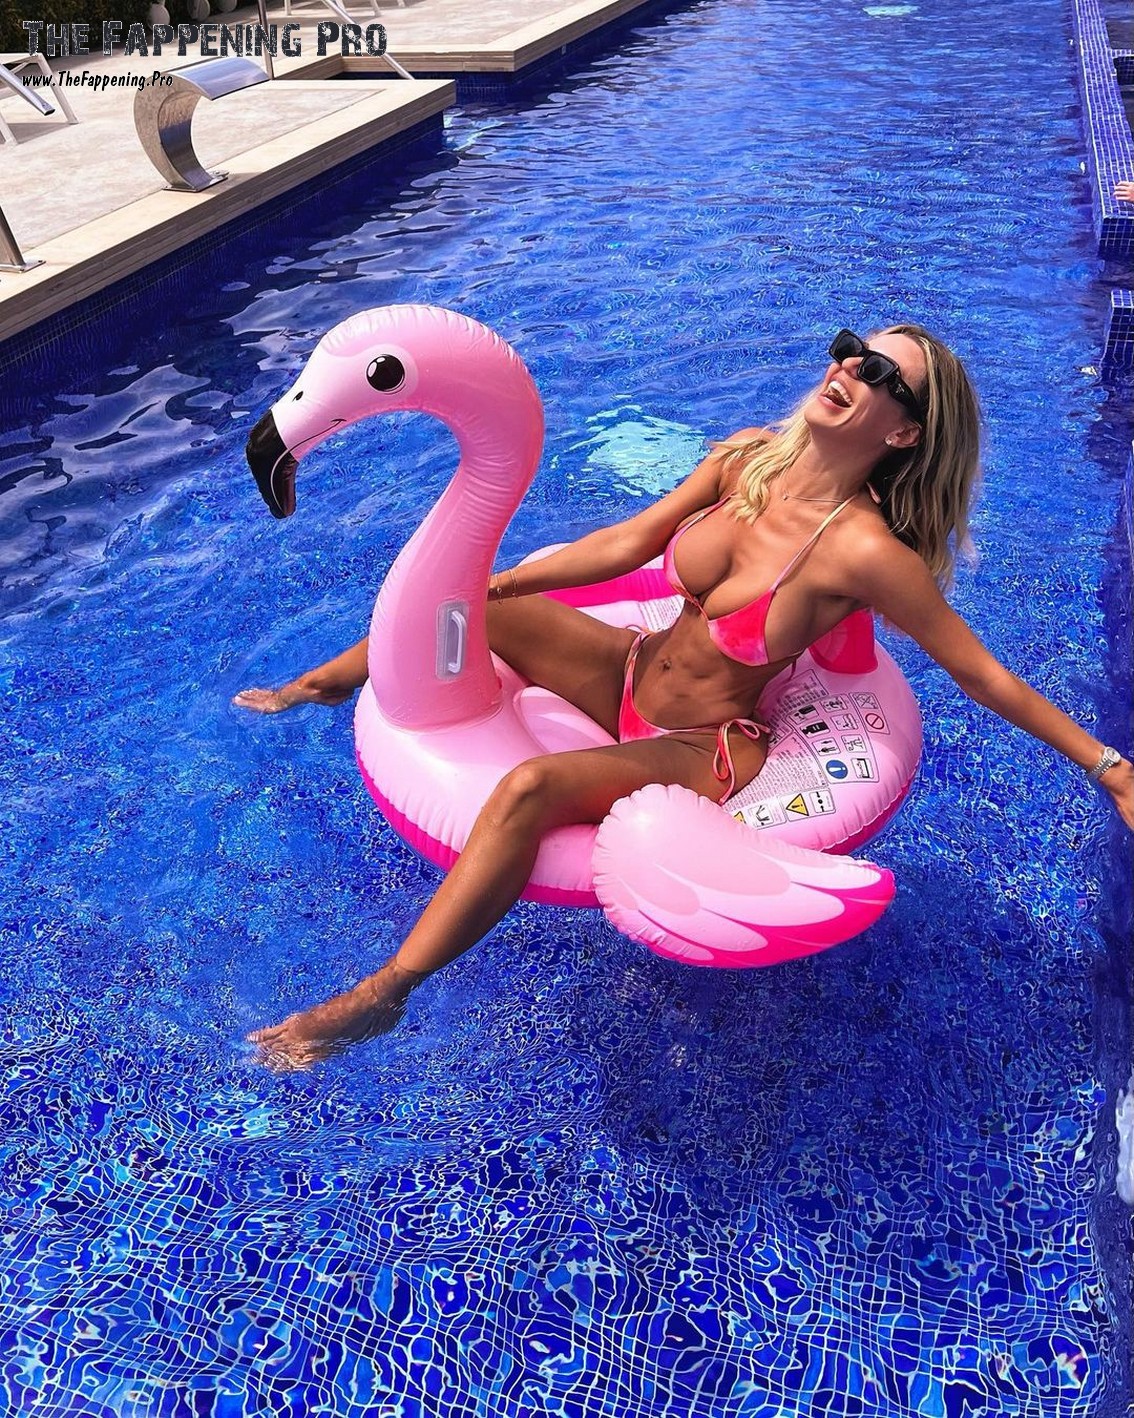 Christine McGuinness Sexy TheFappening.Pro 1 - Christine McGuinness Sexy In Bikini (3 Photos)